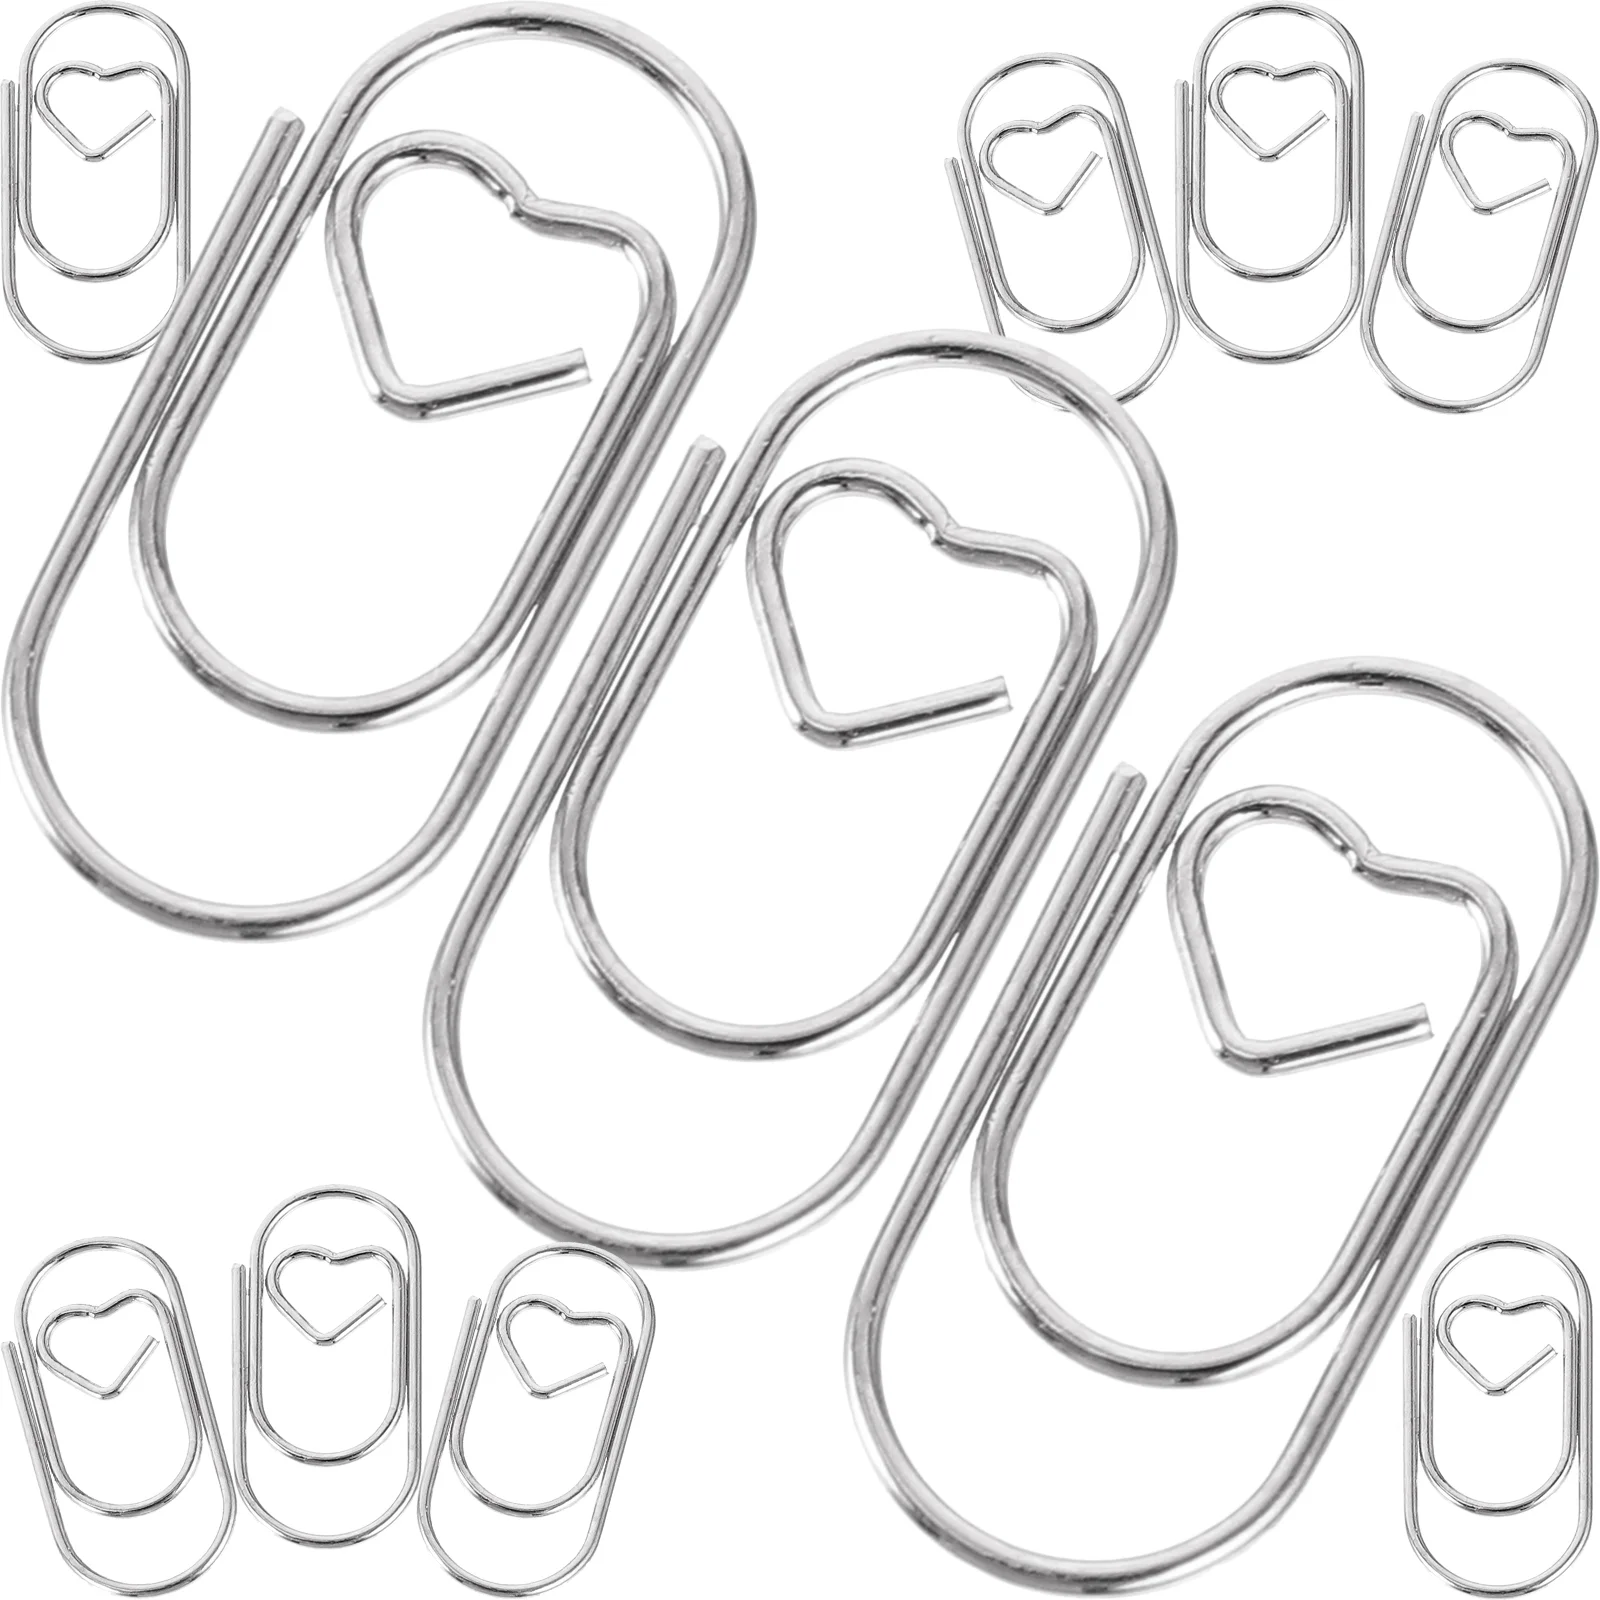 

50 Pcs Creative Special-shaped Pin Paper Clip Small Clips for Document Office Paperclips Folders Variety File Metal